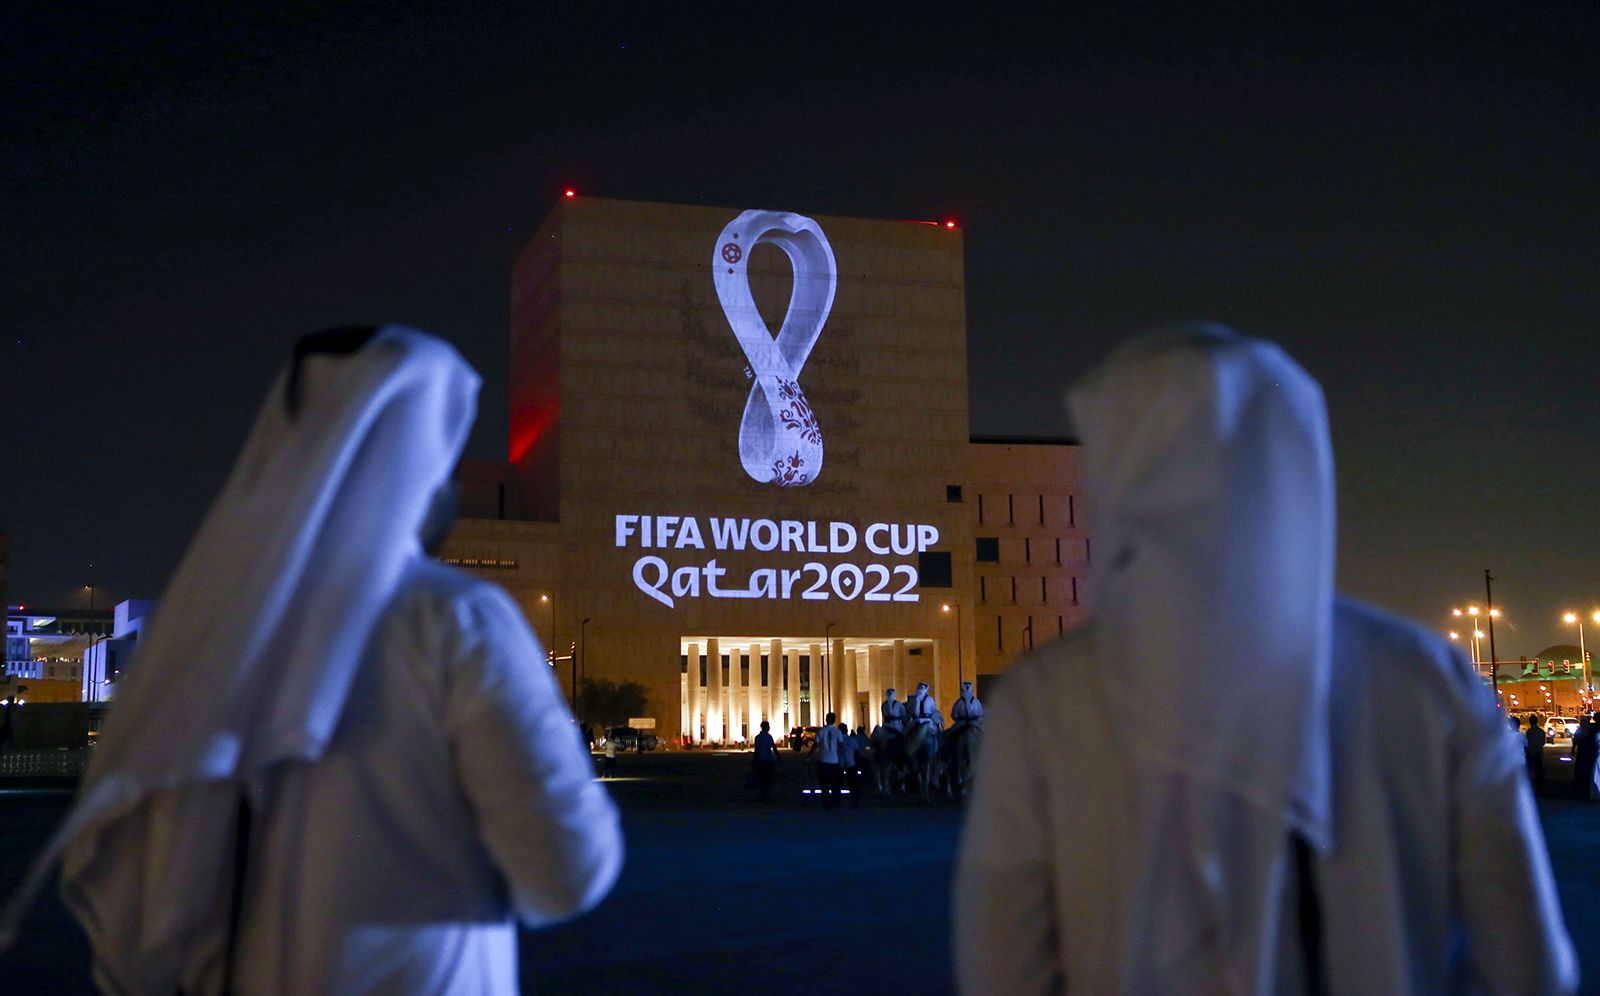 The 2022 Qatar World Cup Was Greenwashed: The Swiss Fairness